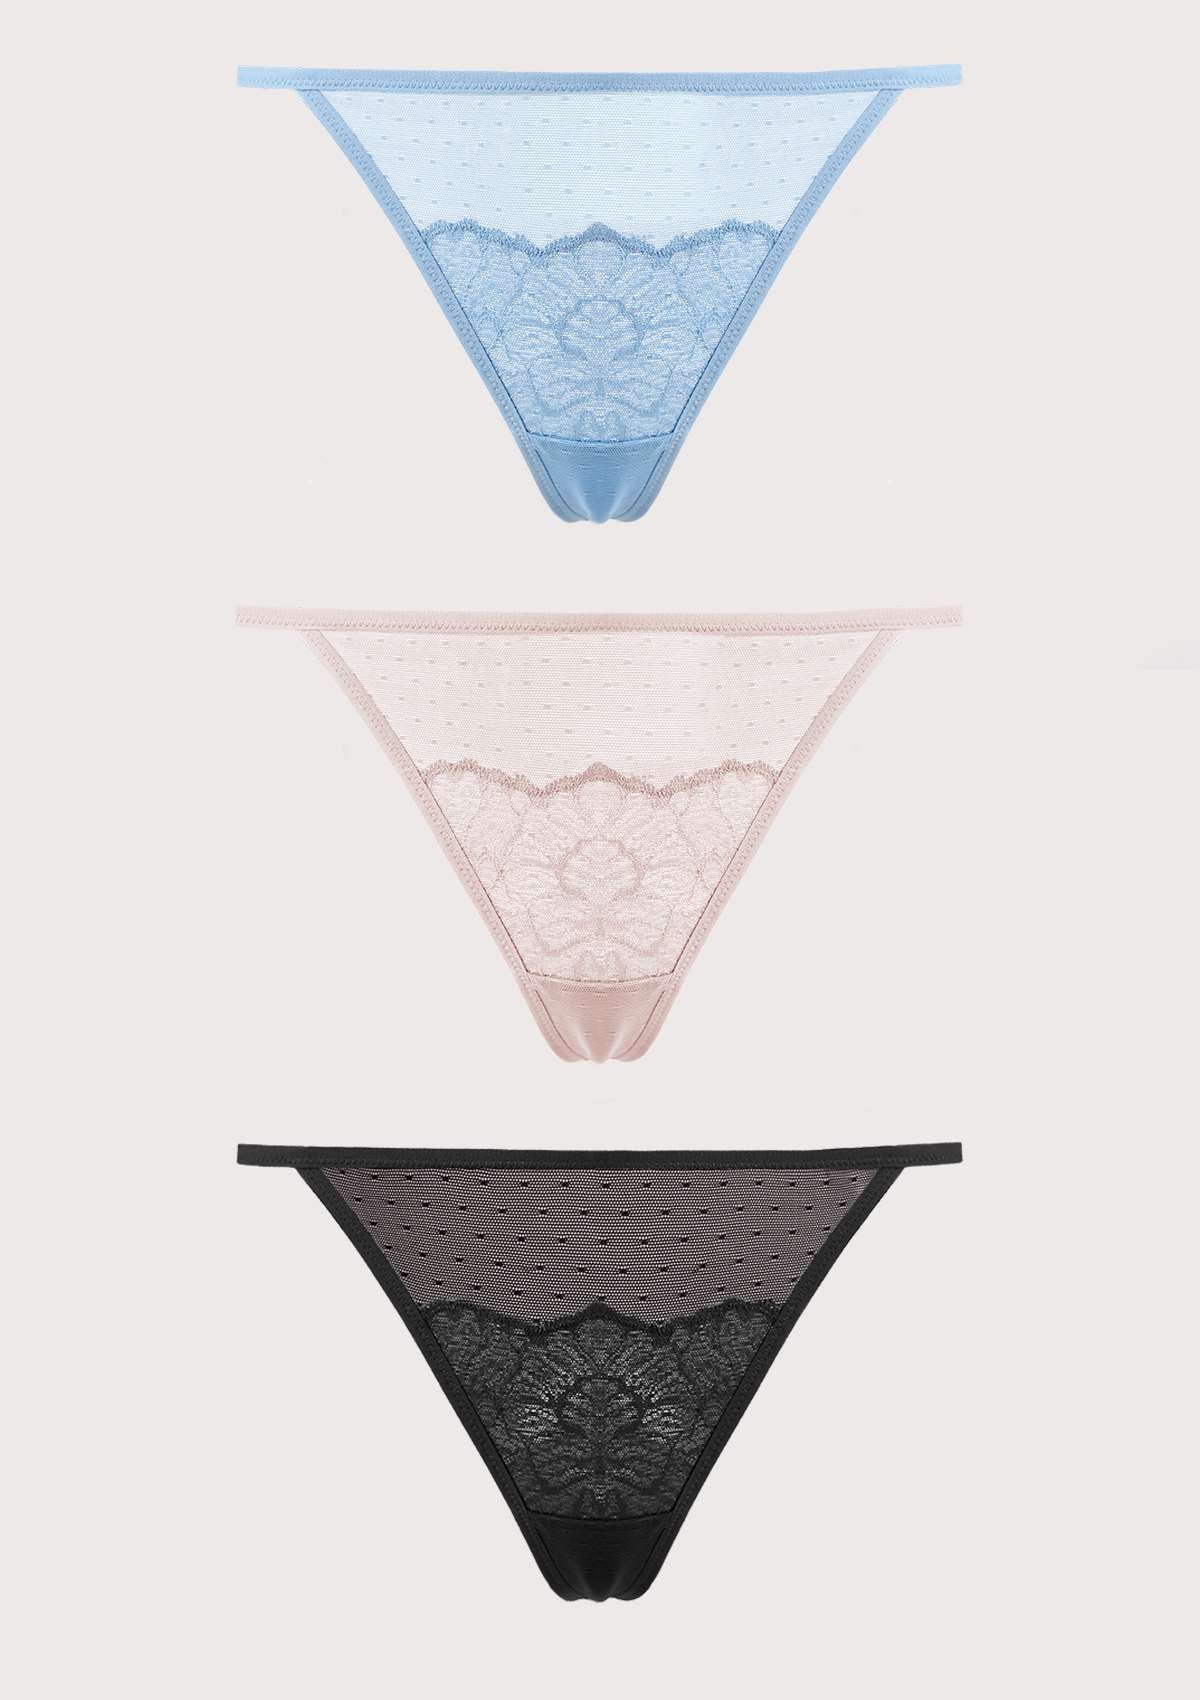 HSIA Blossom Floral Lace Mesh Cheeky Sexy String Thongs - 3 Pack - XXL / Storm Blue+Dark Pink+Black